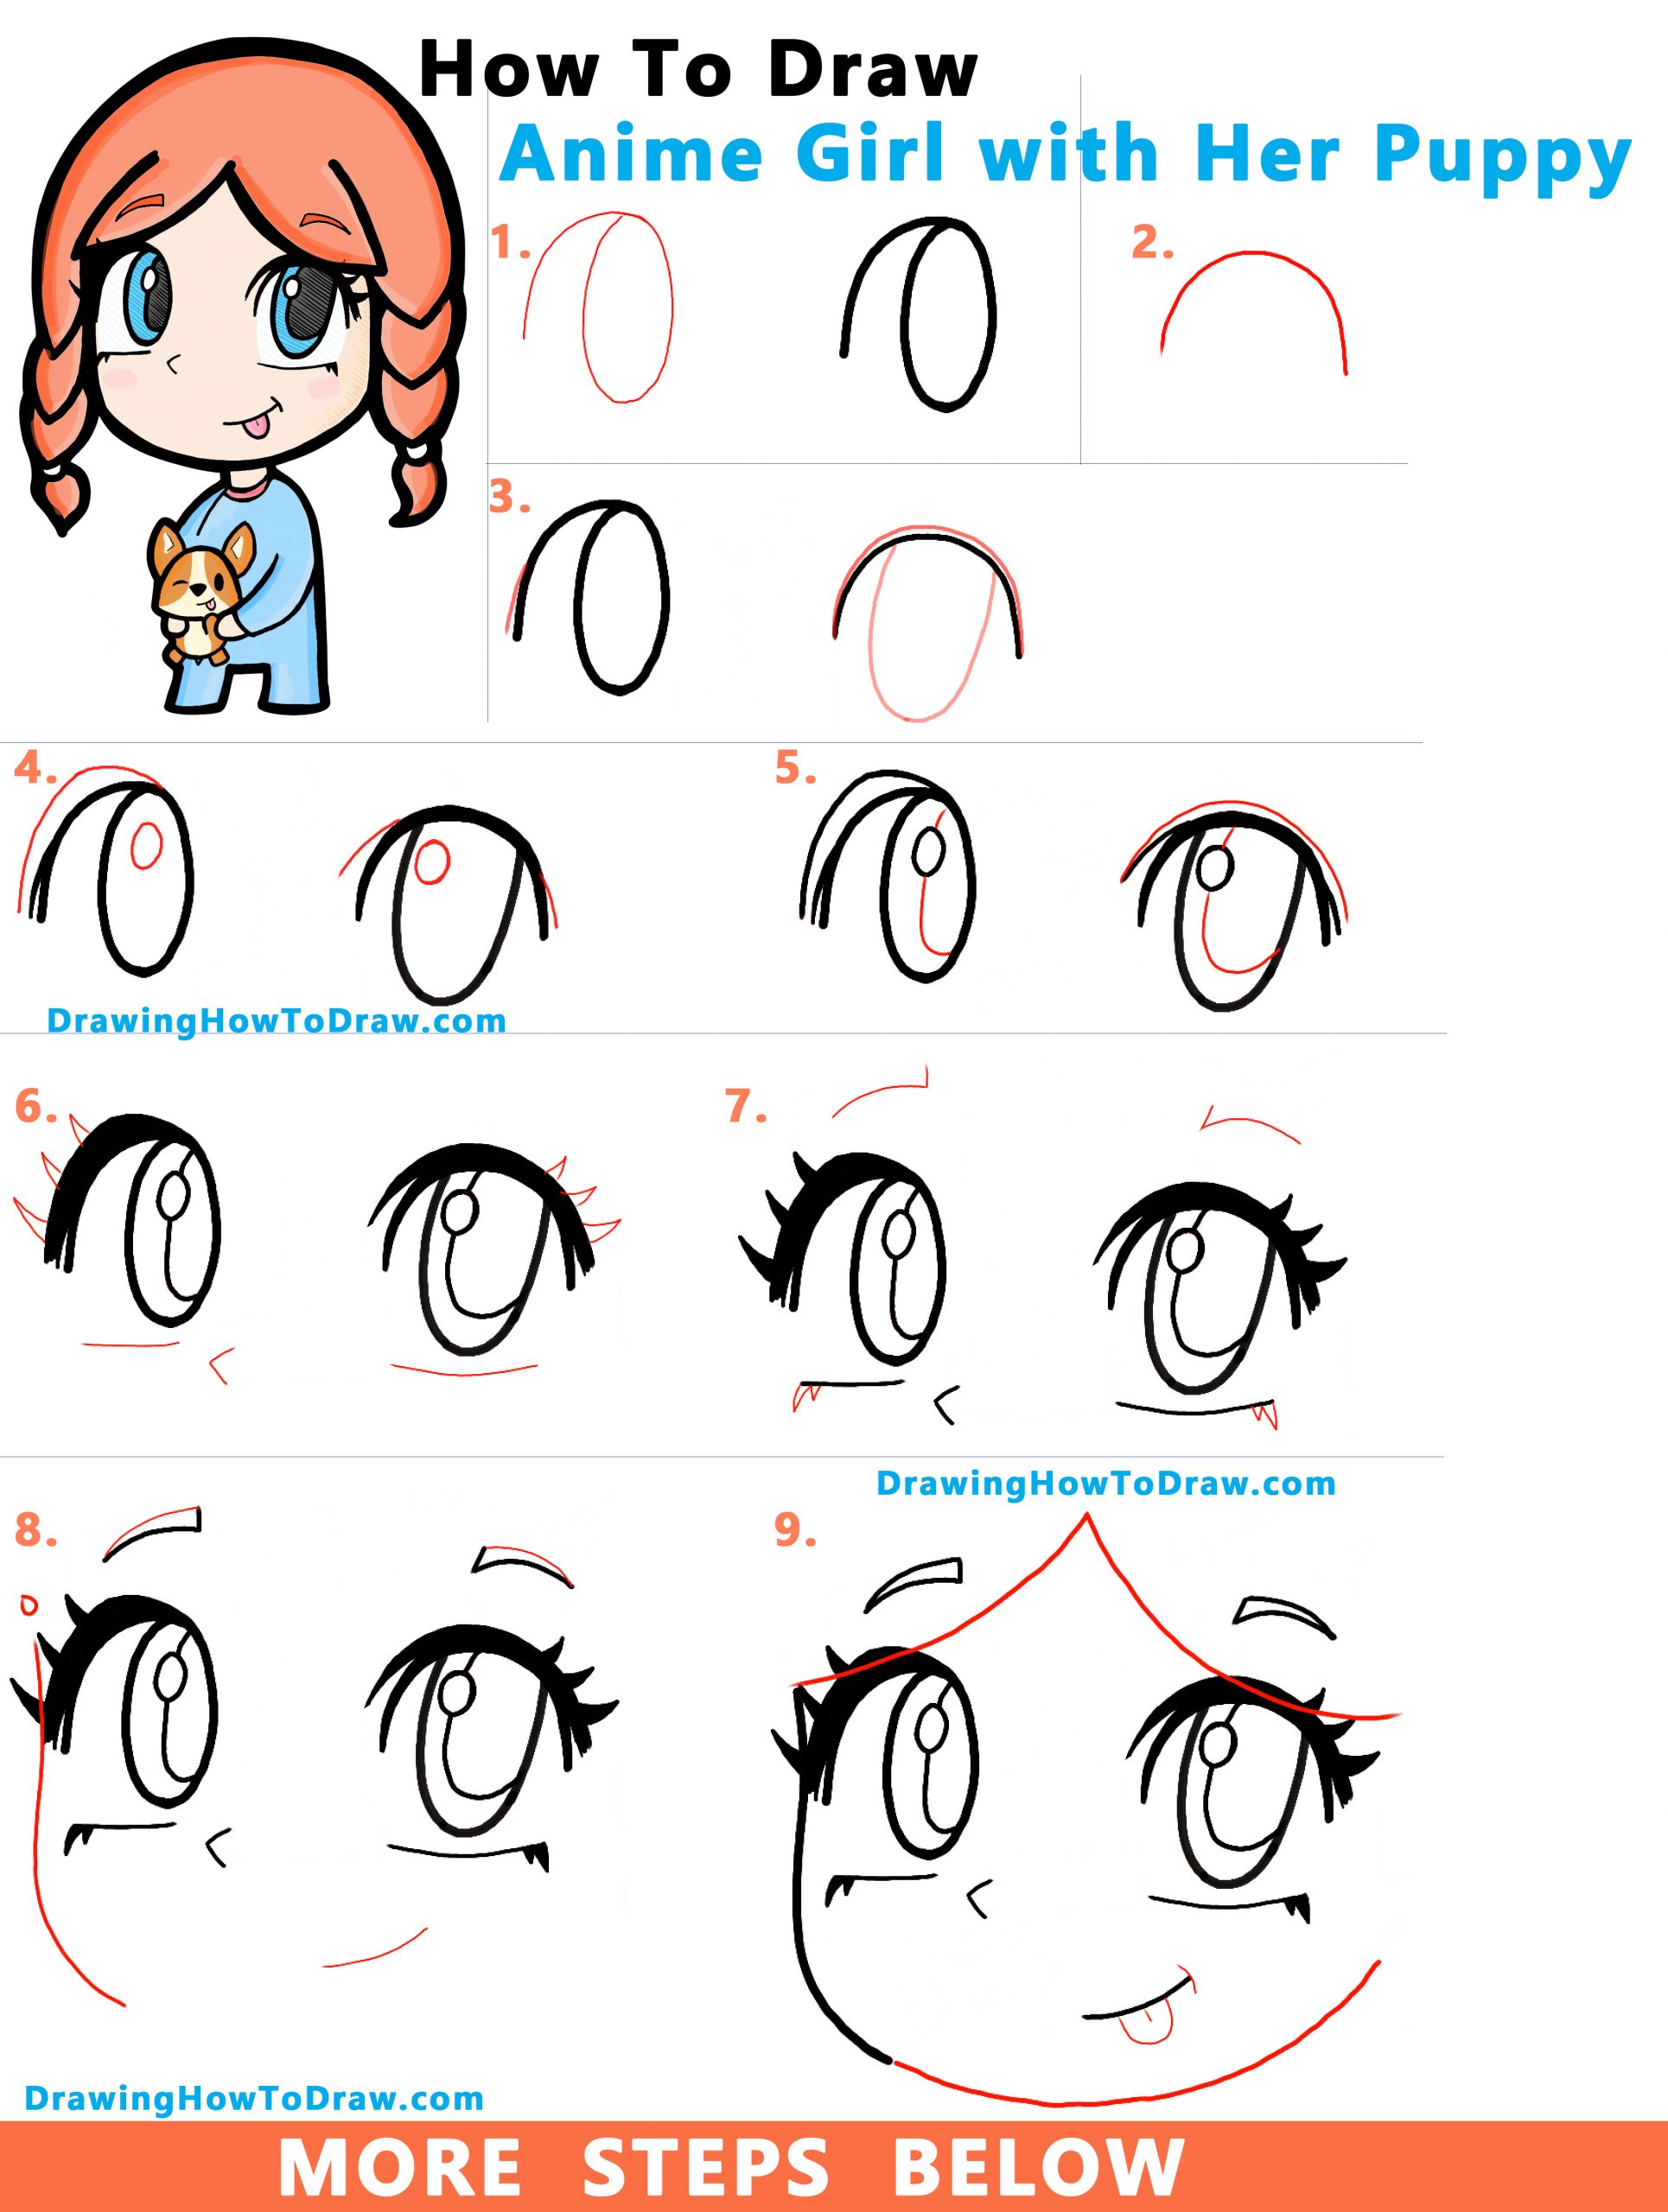 Learn How to Draw Anime / Manga / Chibi Girl with her Corgi Puppy Easy Step by Step Drawing Tutorial